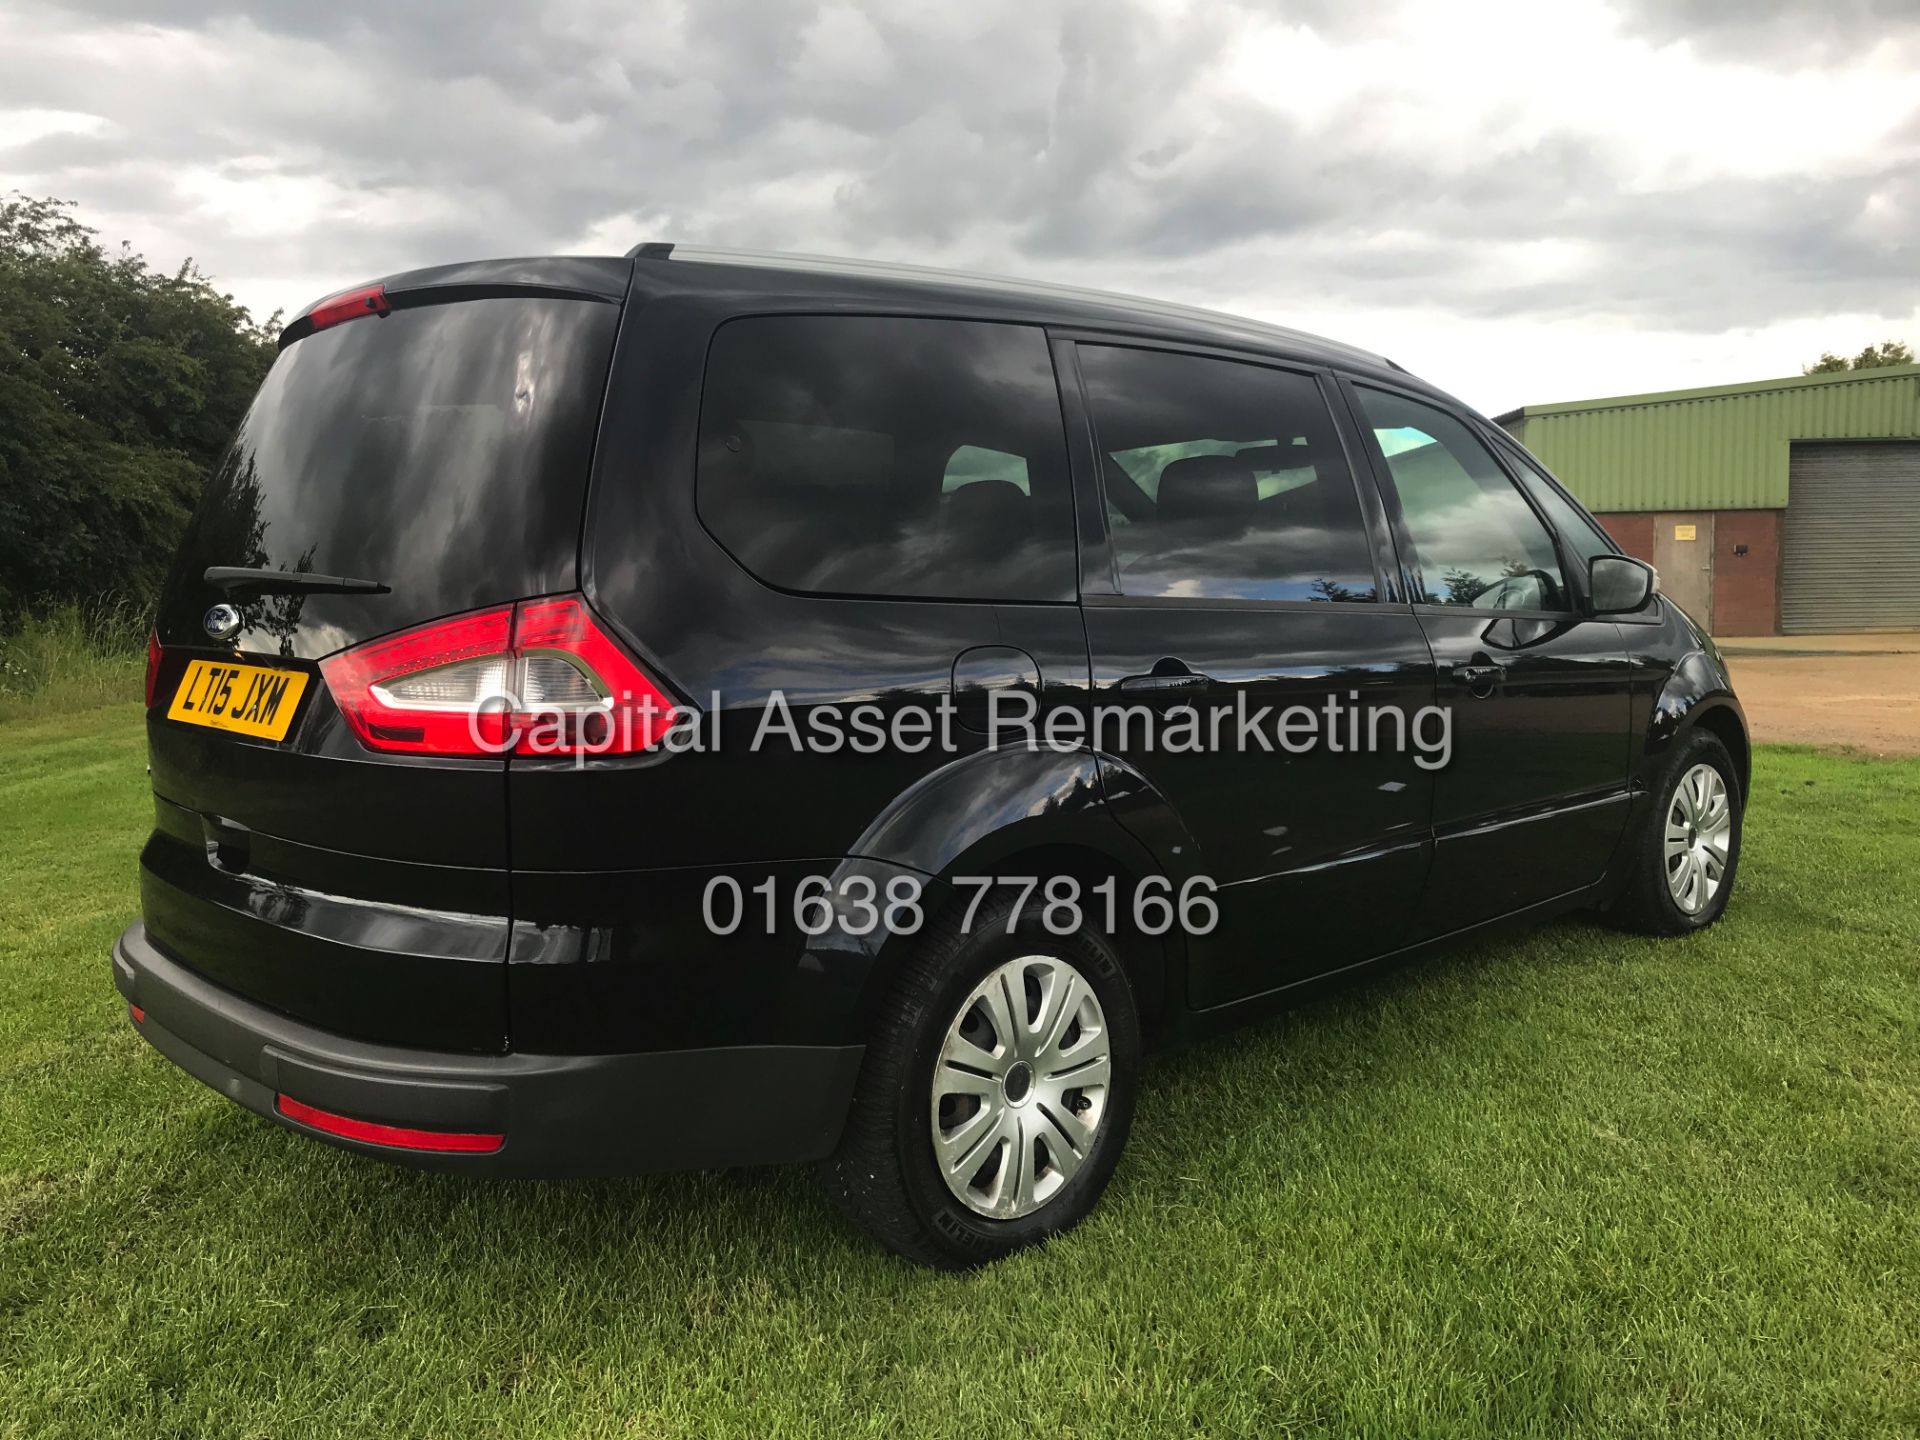 (ON SALE) FORD GALAXY 2.0TDCI "ZETEC" AUTOMATIC 7 SEATER (15 REG) AIR CON - ELEC PACK *NO VAT* - Image 8 of 18